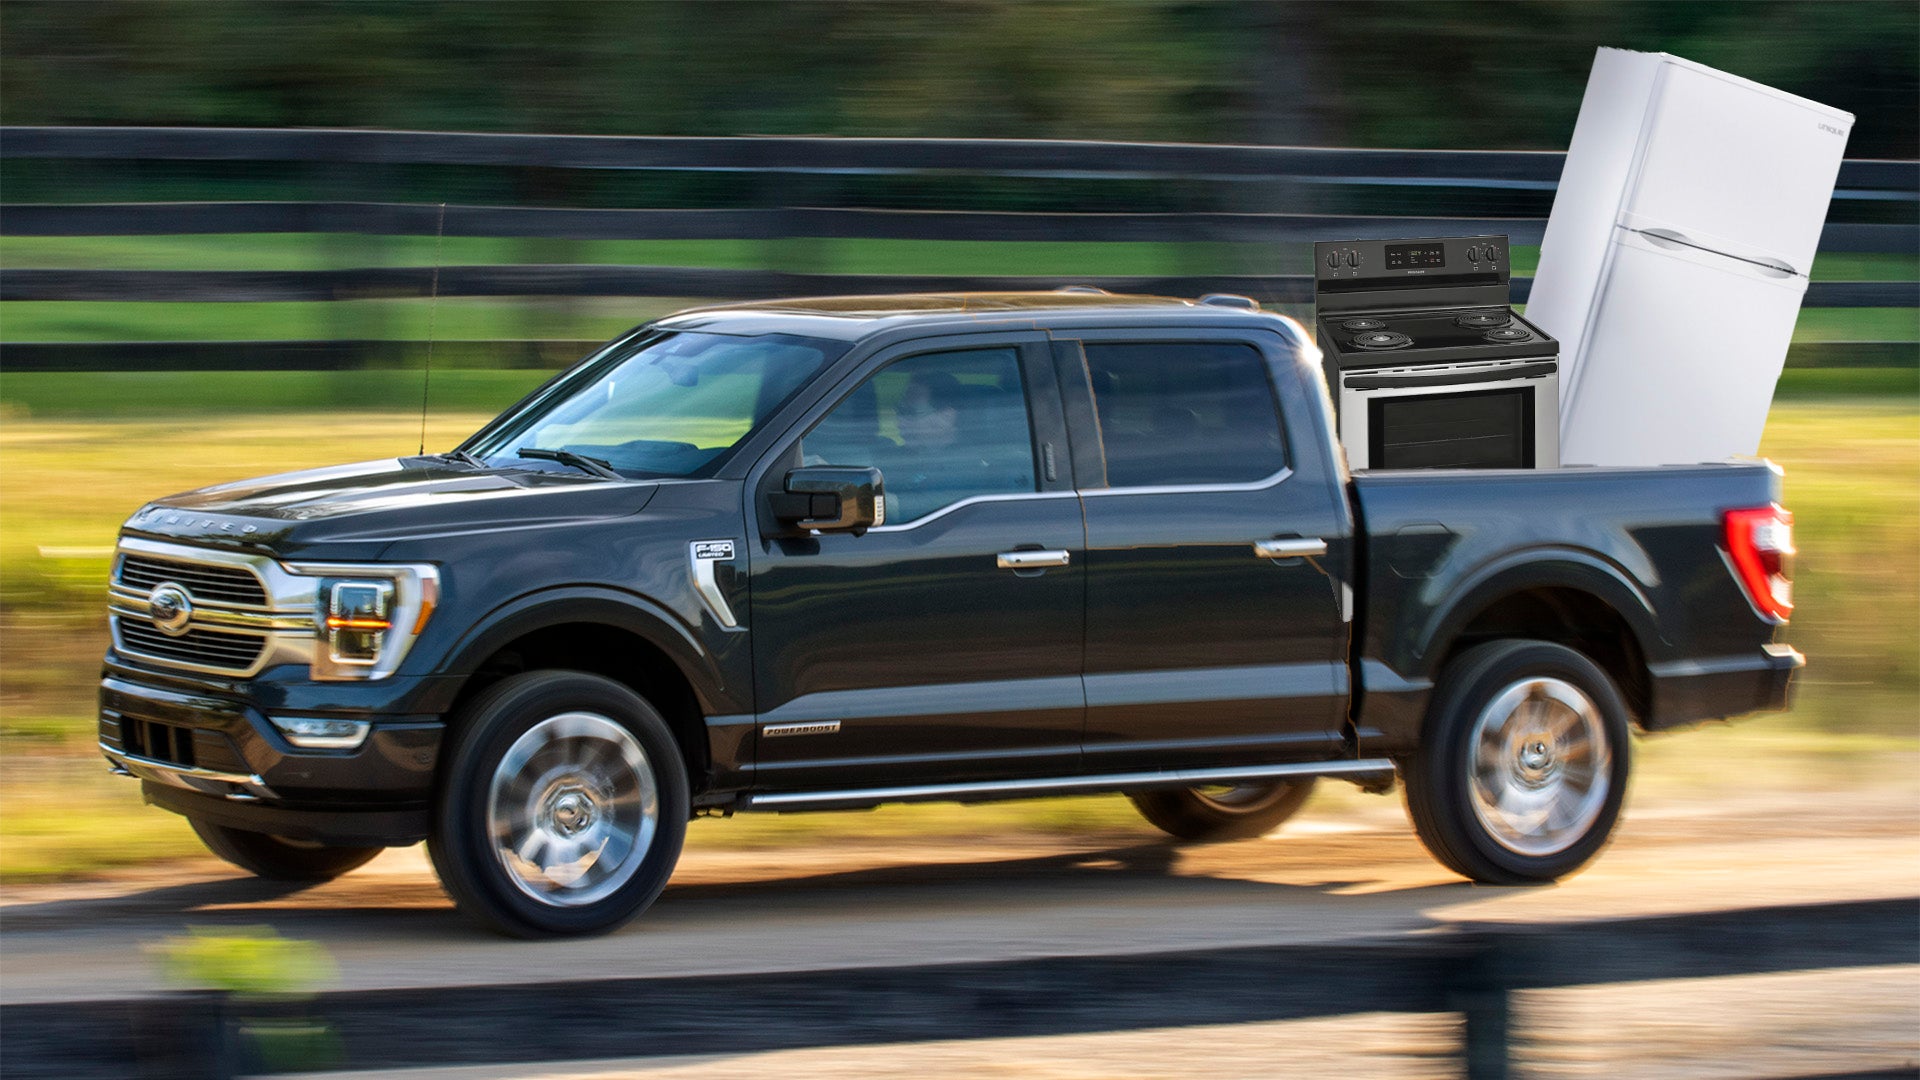 You Can Power An Entire Mobile Restaurant with the 2021 Ford F-150’s Onboard Generator